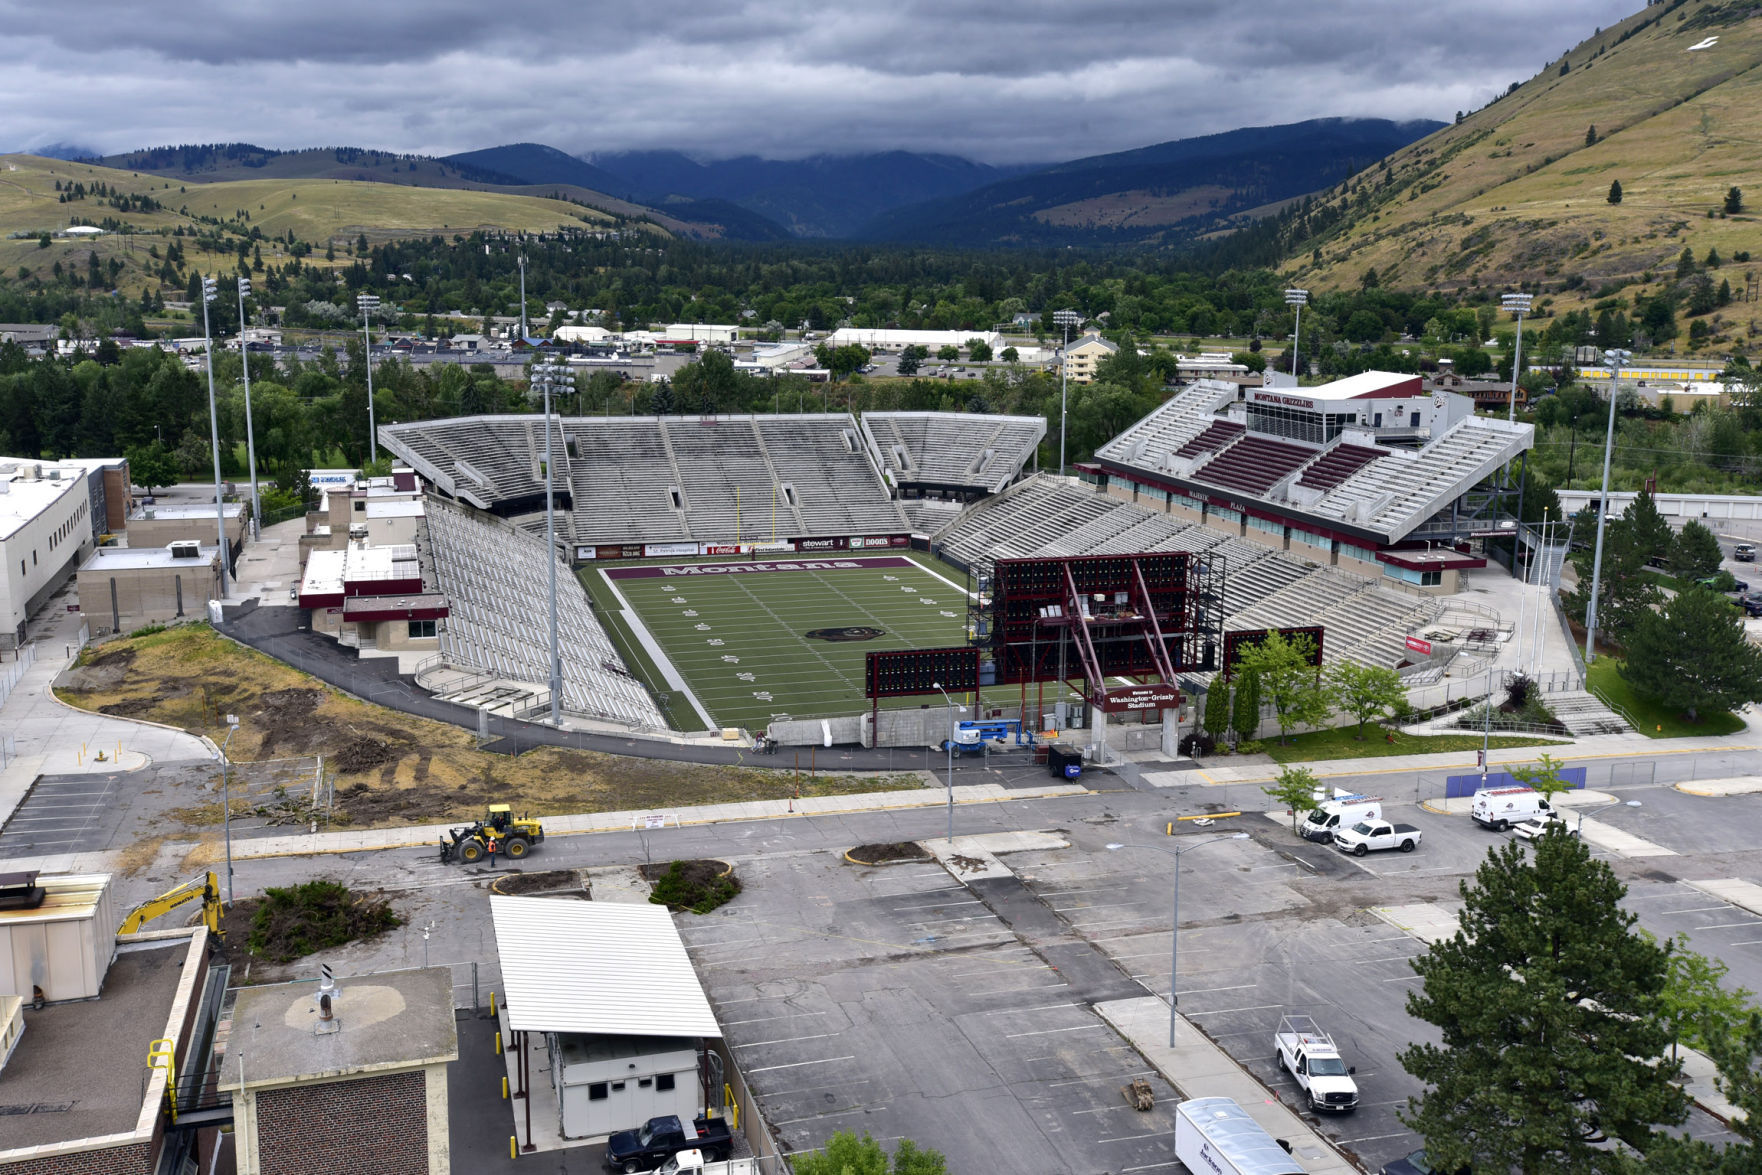 Missoula Grizzly Stadium Seating Chart